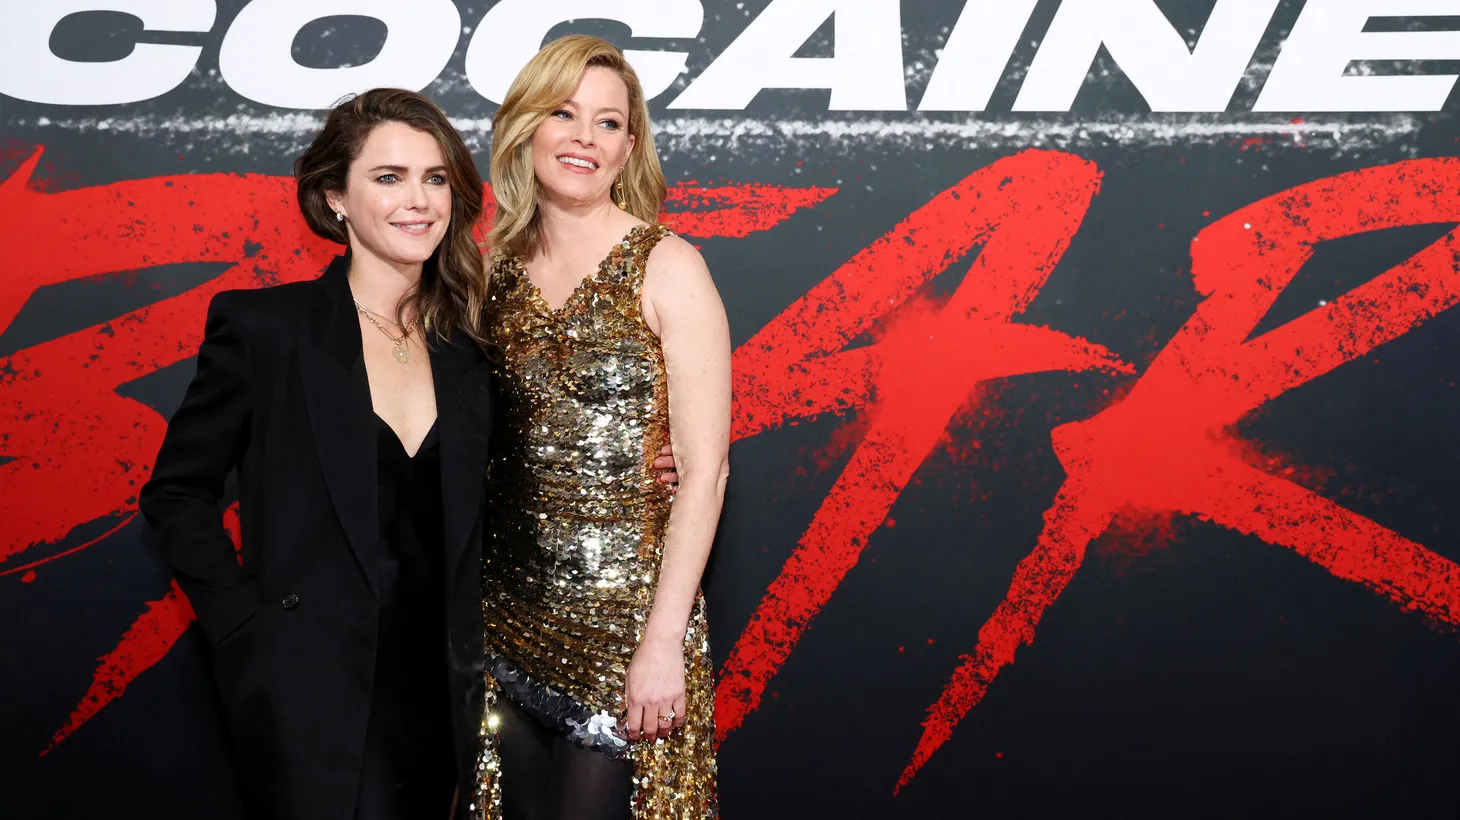 Director and producer Elizabeth Banks (right) and cast member Keri Russell attend a premiere for the film 'Cocaine Bear' in Los Angeles on February 21, 2023.